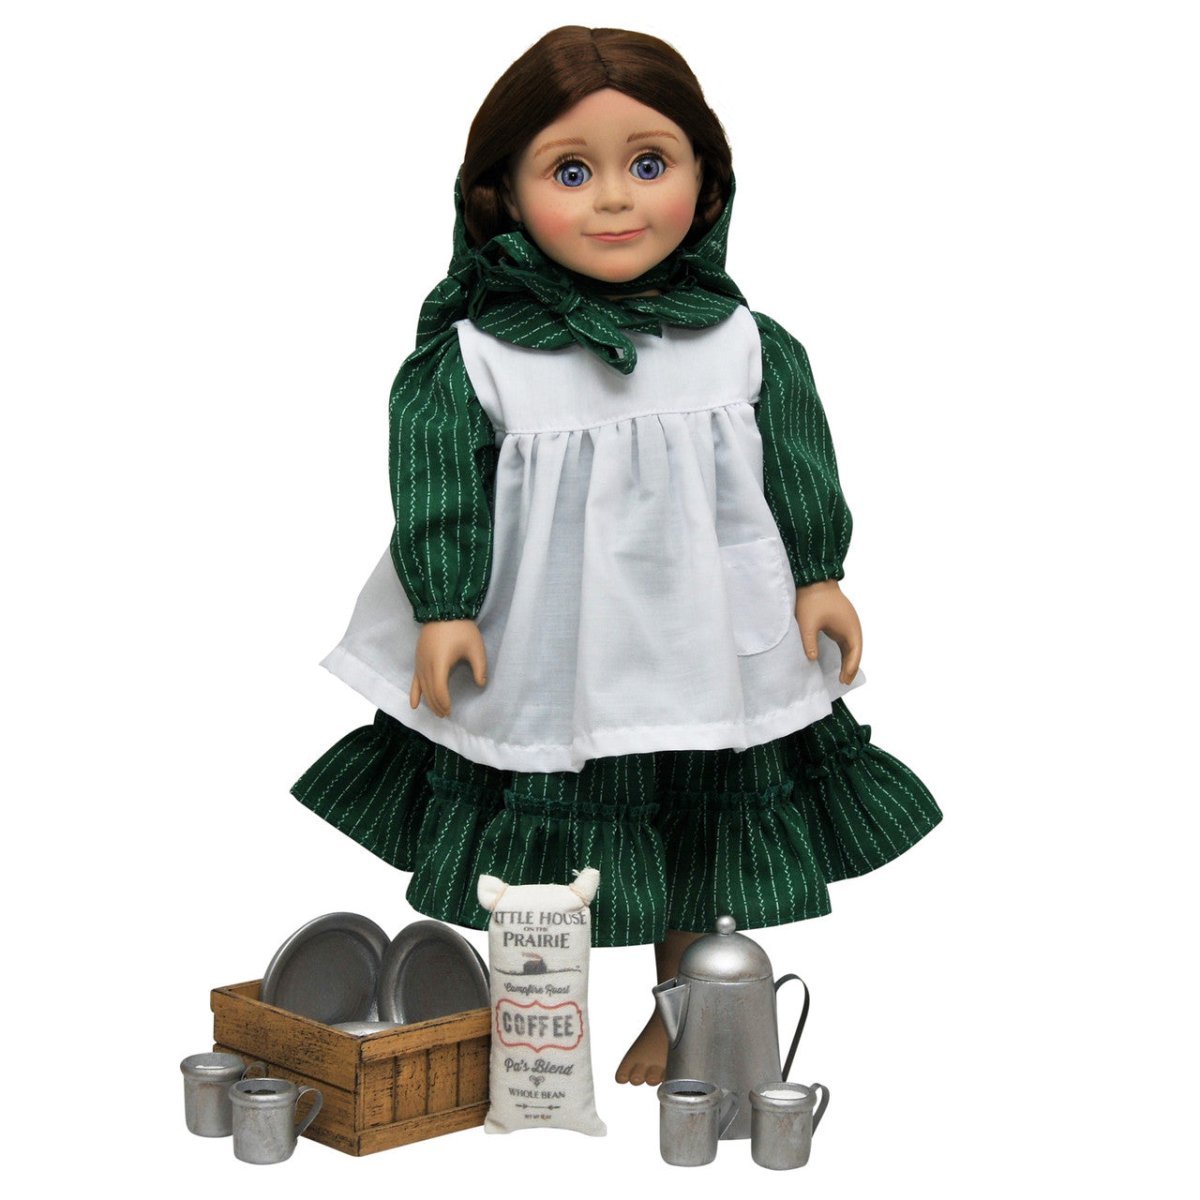 Little House On The Prairie 1880's Dishware Set For 18 Inch Dolls - Simon's Collectibles